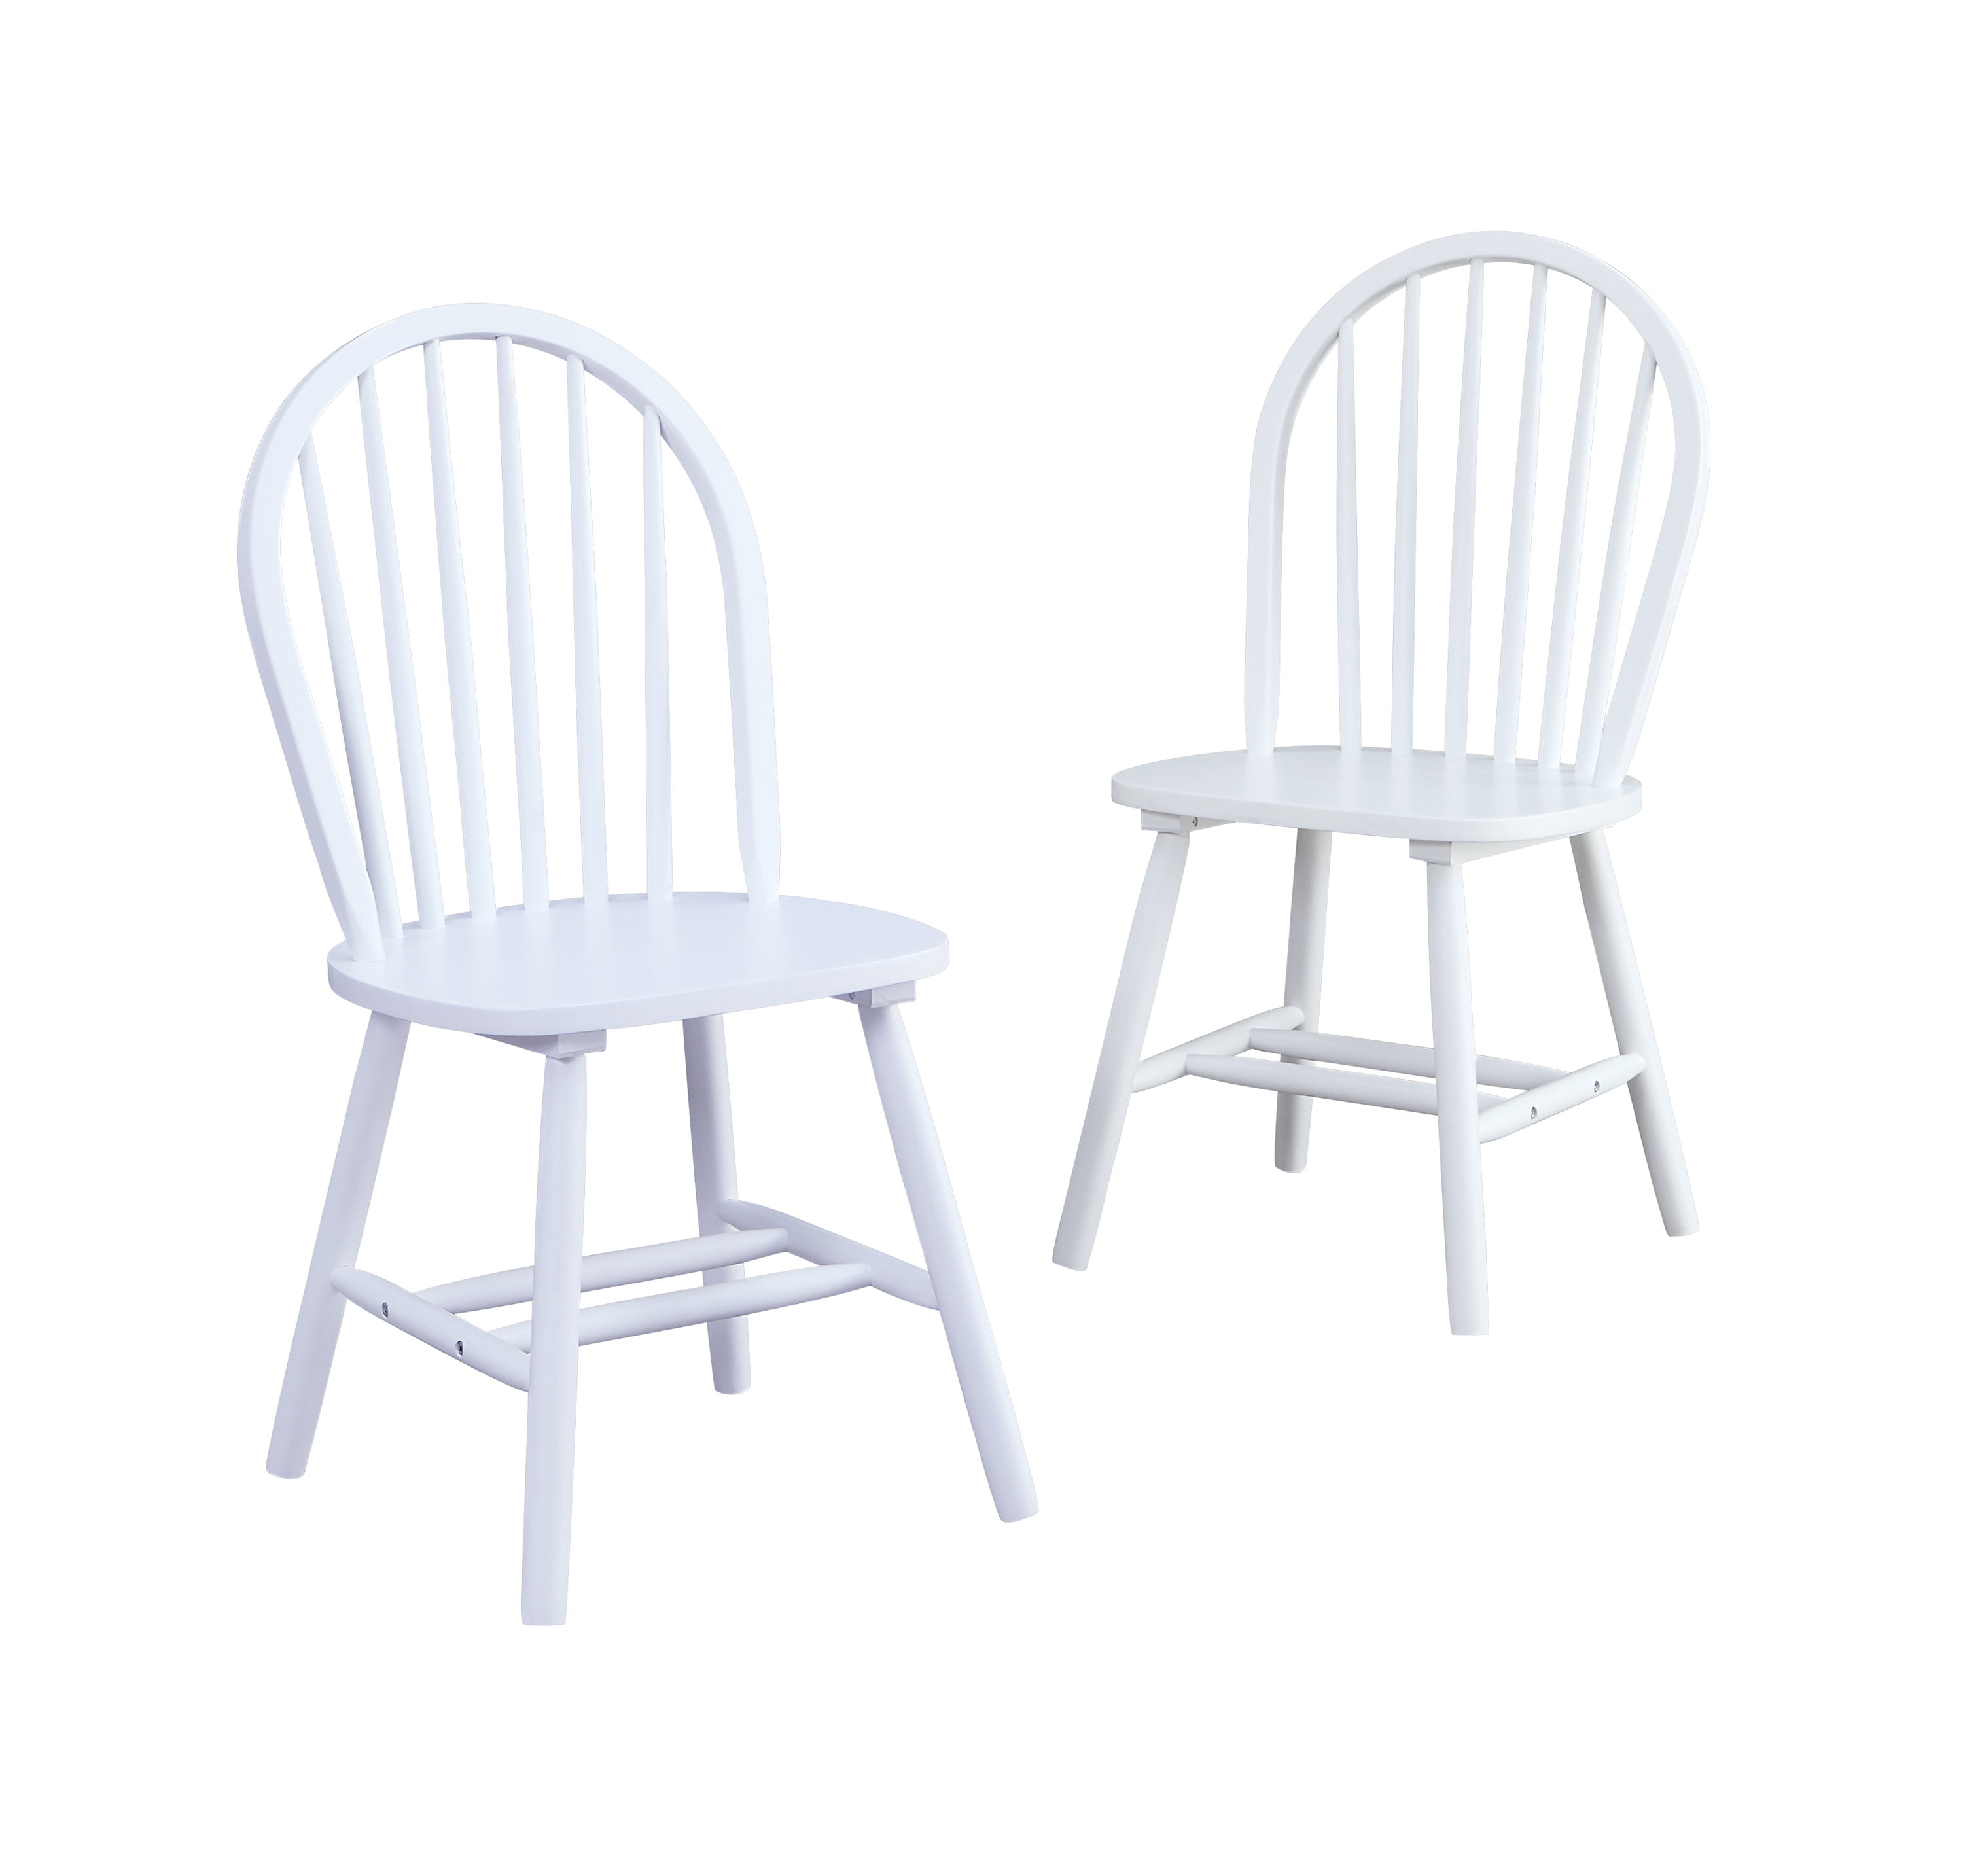 New Heavy Duty Commercial Retro Diner Chairs $95/ea 